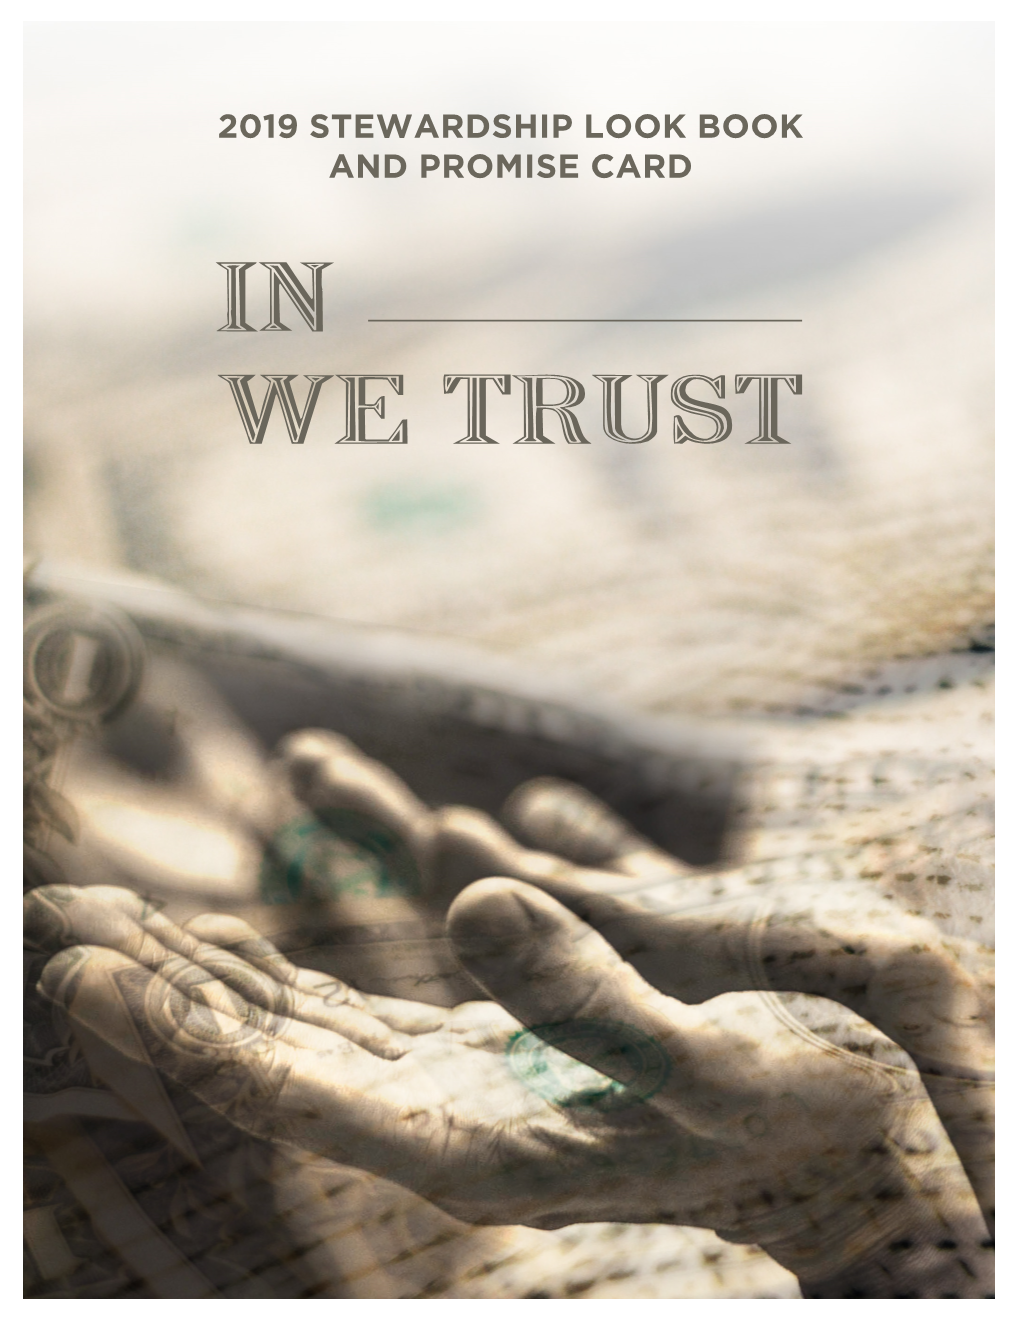 2019 Stewardship Look Book and Promise Card